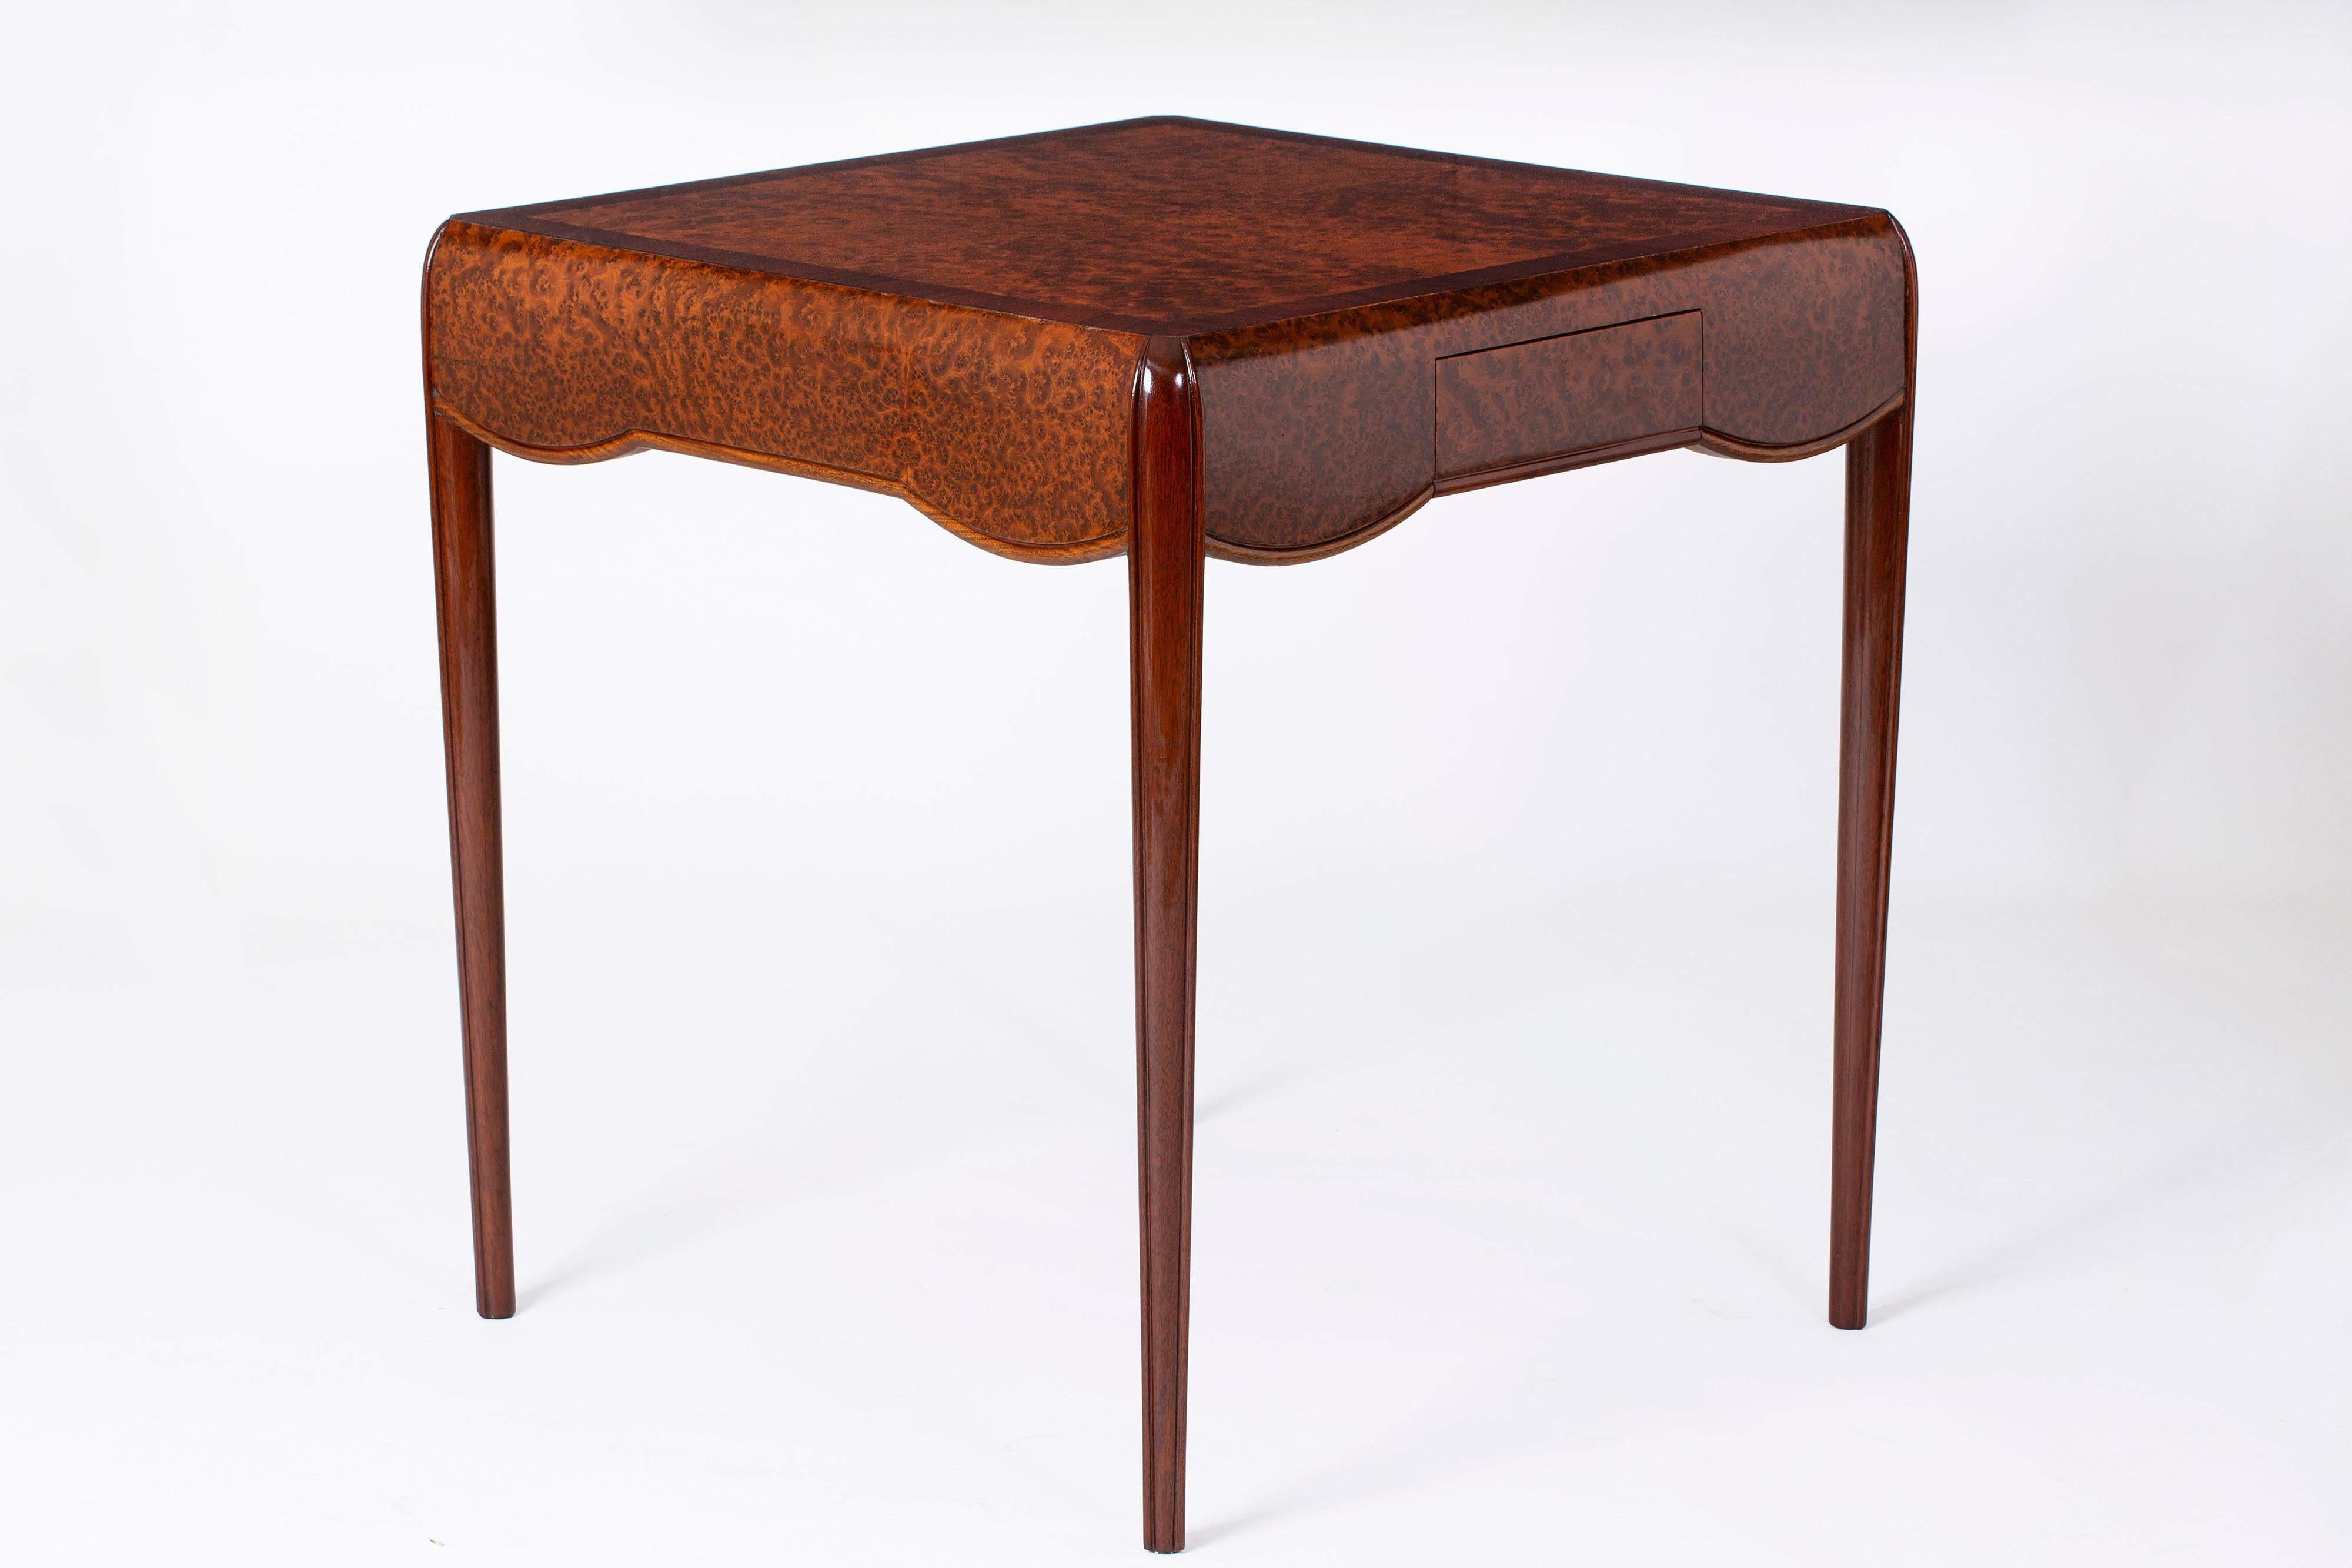 Extremely elegant Art Deco salon table by Lucie Renaudot manufactured in a beautiful cut of amboyna burl and mahogany wood from circa 1927. The top section, which sits on four graceful tapering legs, has a pair of frieze drawers which makes it ideal